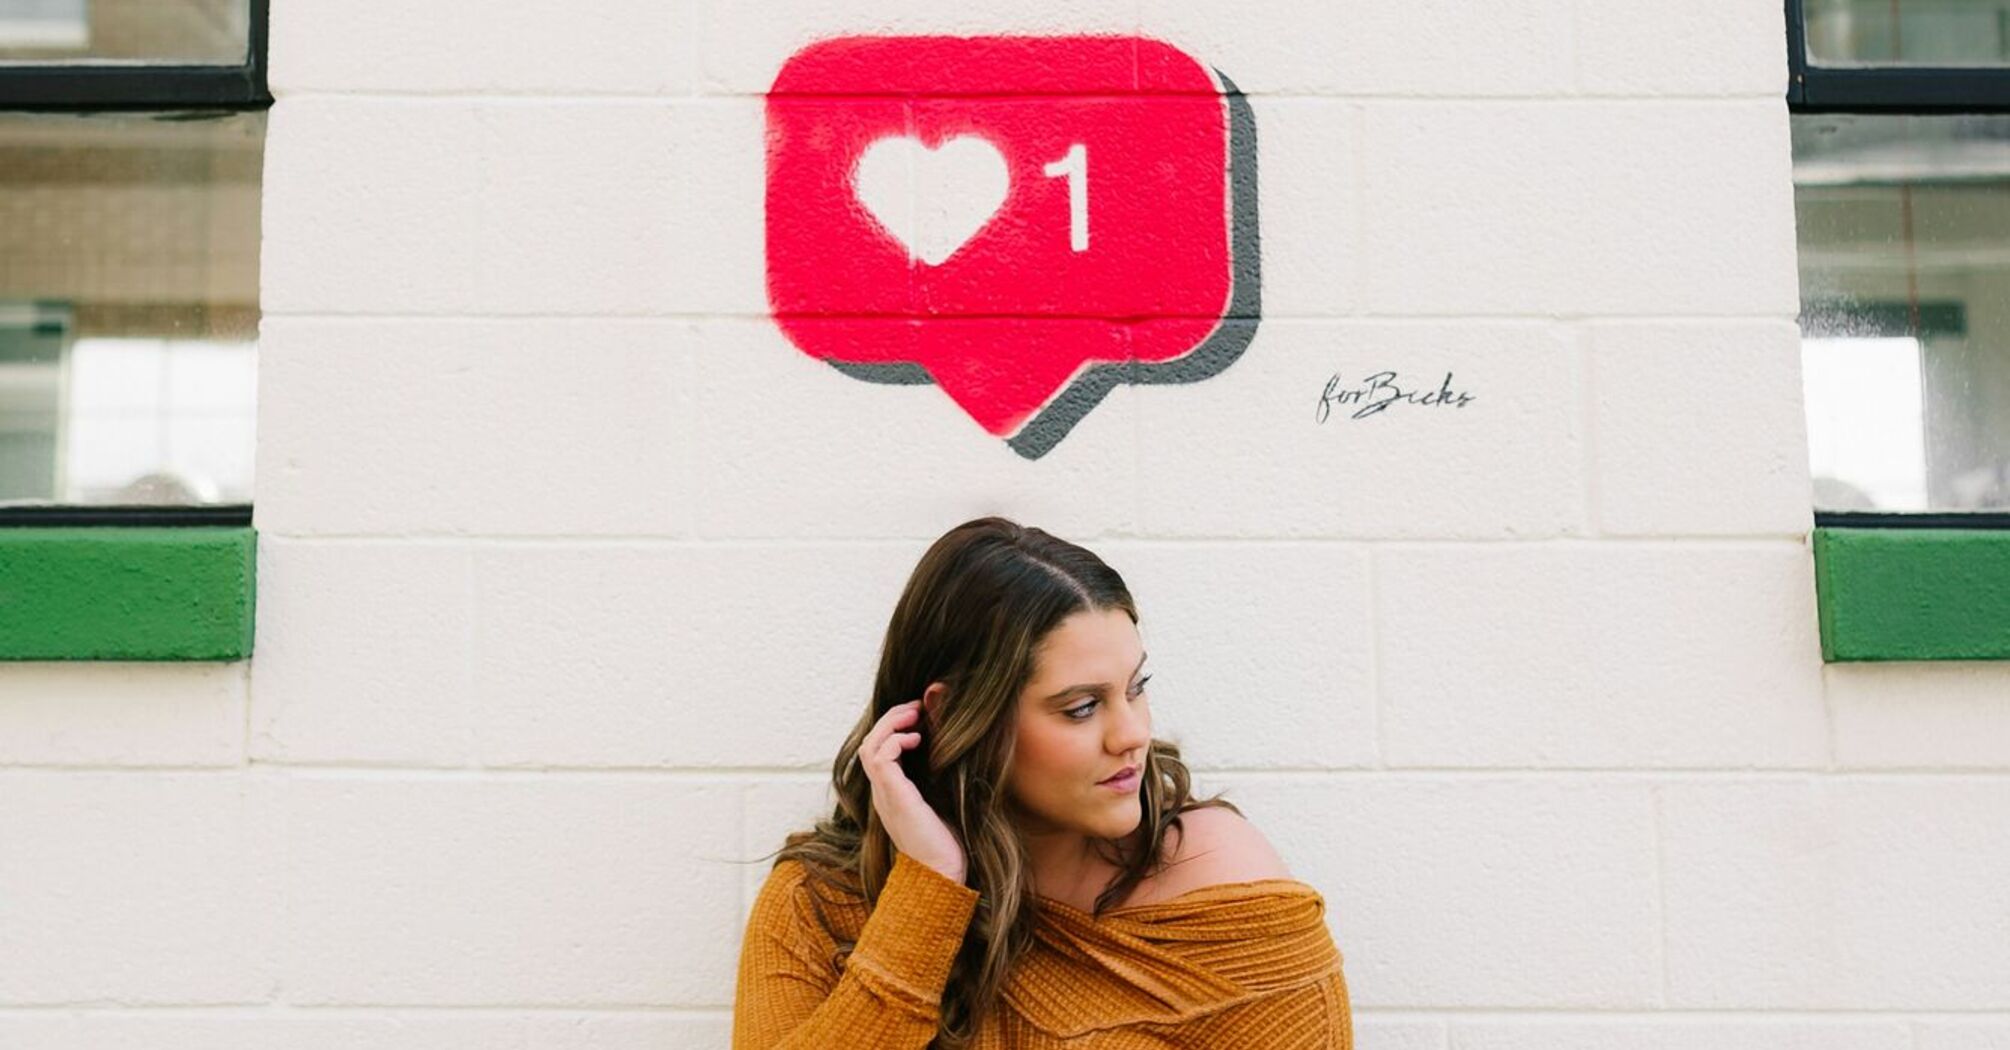 A woman in a mustard yellow sweater standing against a white wall with a painted red social media 'like' notification icon